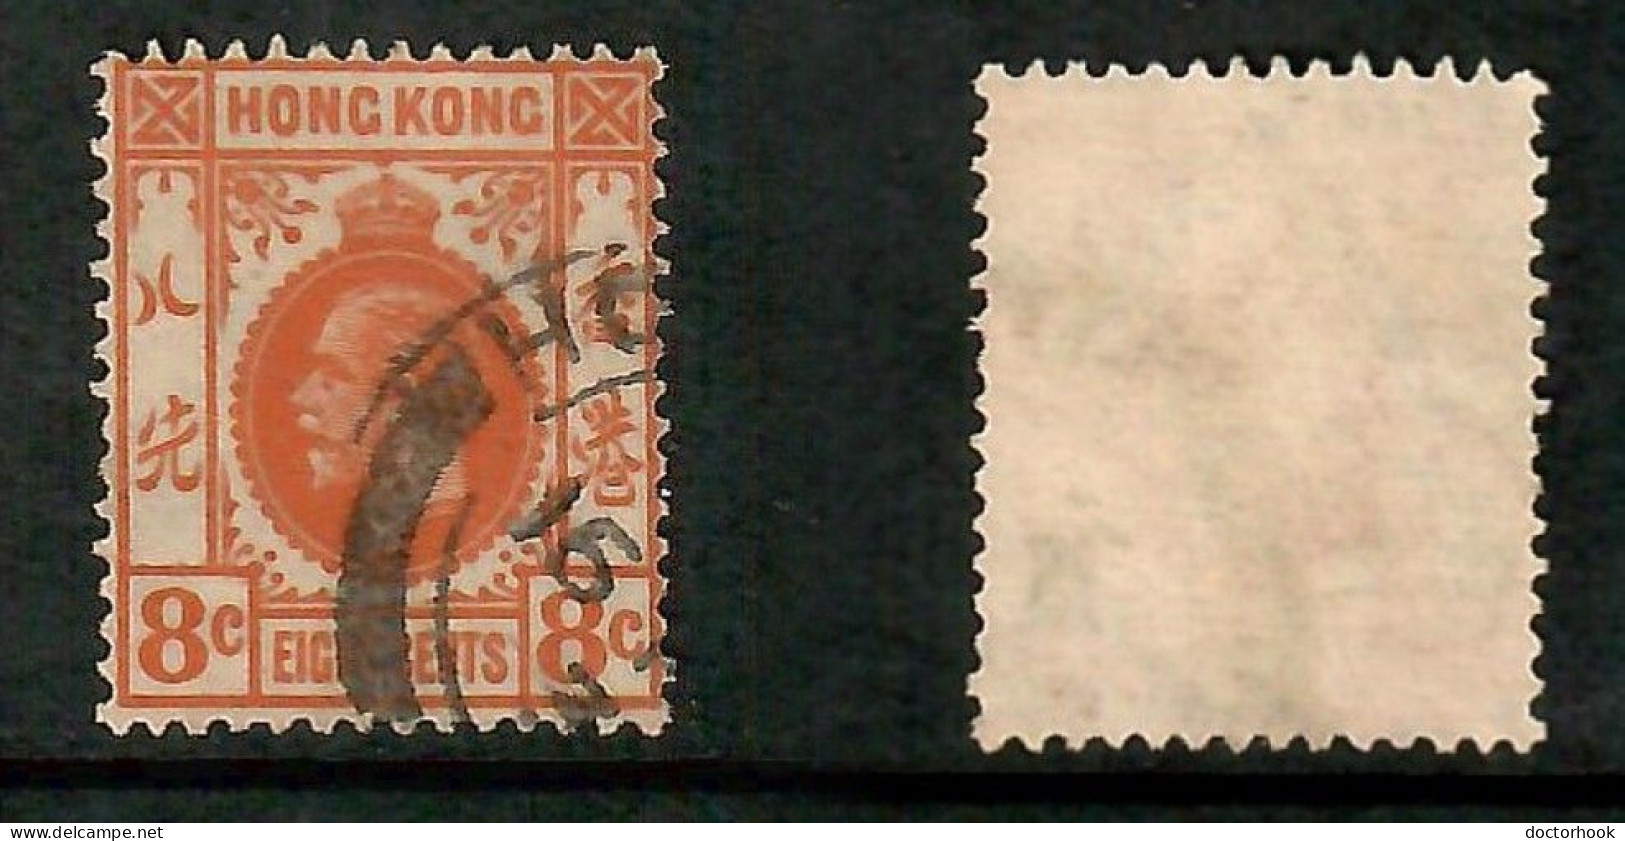 HONG KONG   Scott # 136 USED (CONDITION AS PER SCAN) (Stamp Scan # 991-11) - Gebraucht